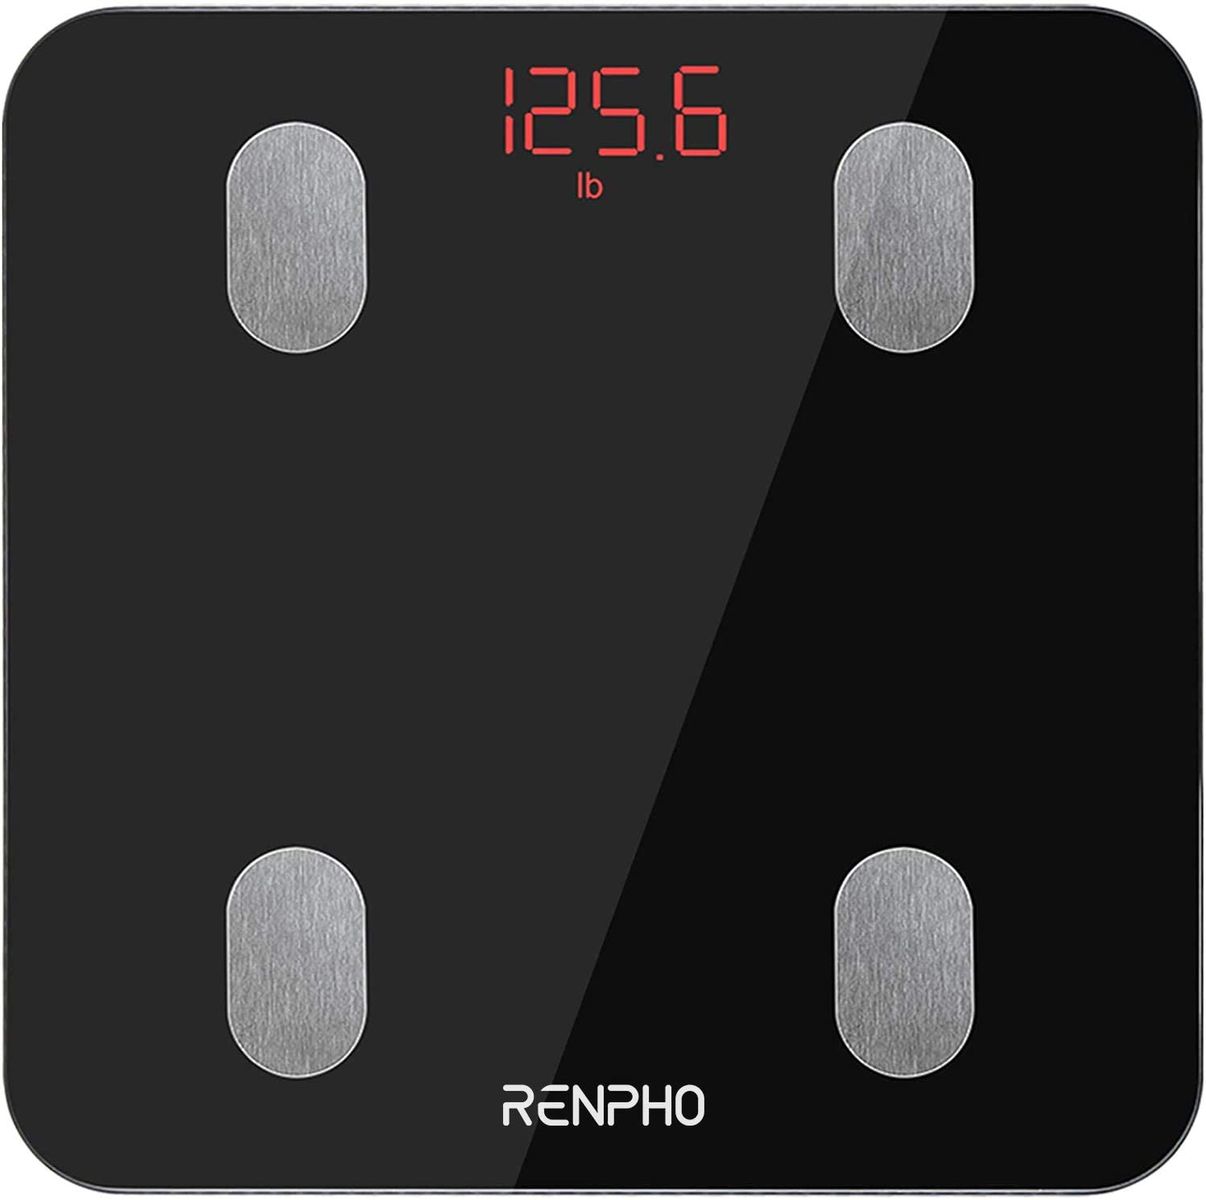 RENPHO Body Fat Scale, Bluetooth Personal Scale with App, Smart Digital Scale for Body Fat, BMI, Weight, Muscle Mass, Water, Protein, Skeletal Muscle, Bone Weight, BMR (Black)